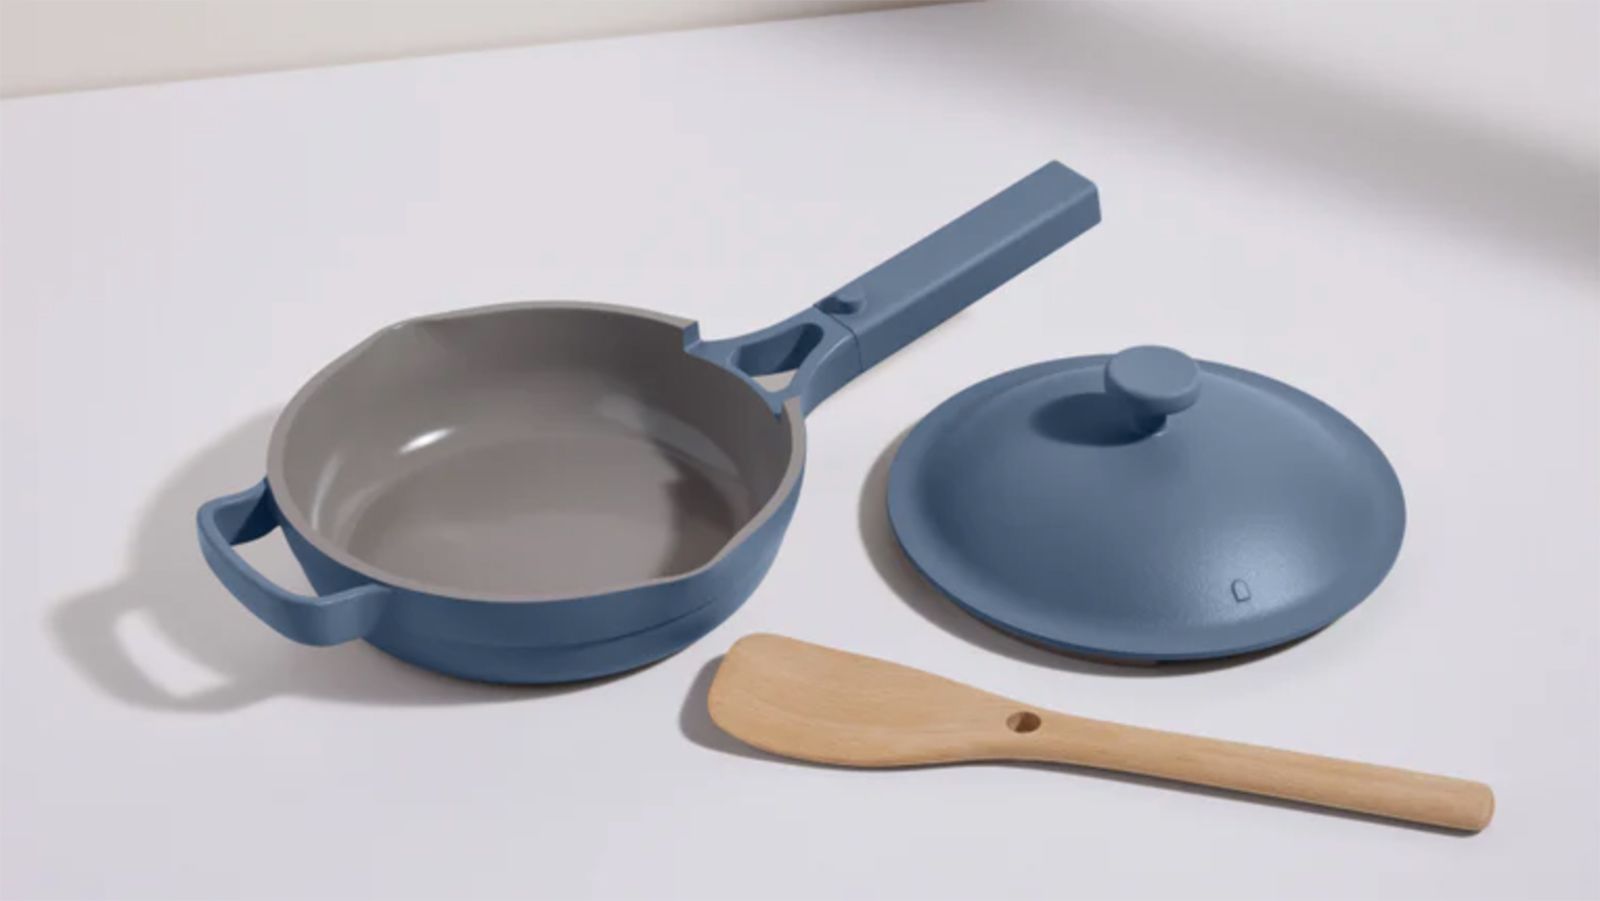 Our Place spring sale: Deals on the Always Pan and Perfect Pot